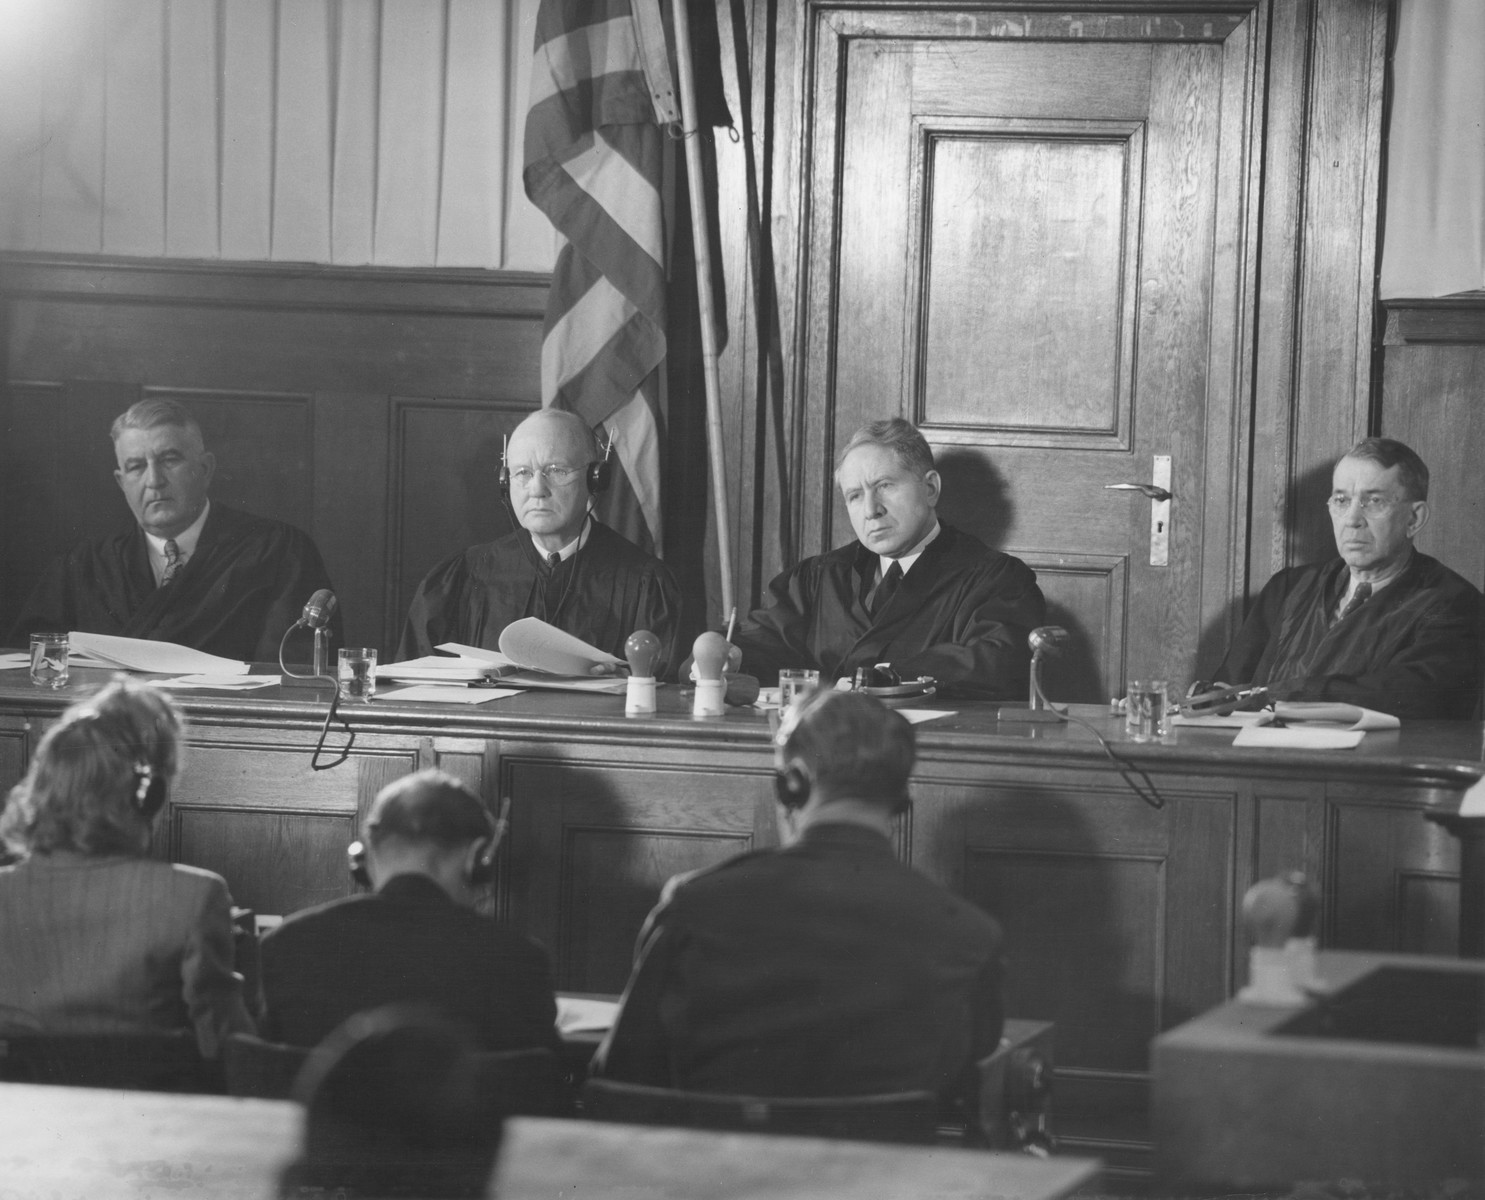 The judges of Military Tribunal II at a session of the Milch Trial.  

Pictured from left to right are F. Donald Phillips, Robert M. Toms, Michael A. Musmanno, and John J. Speight.